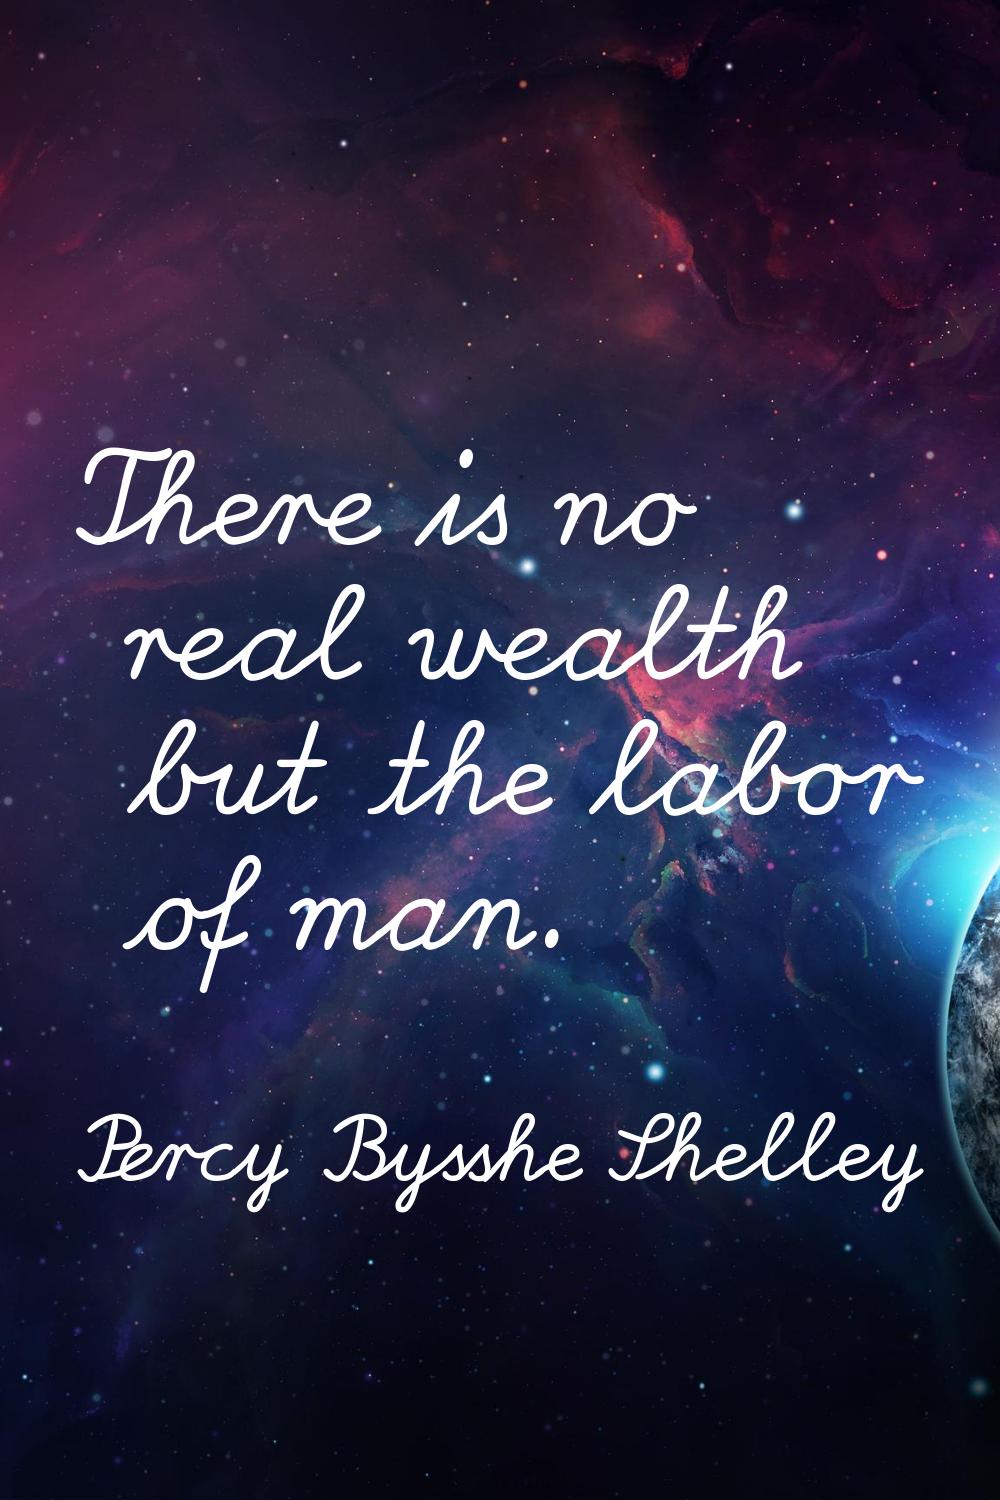 There is no real wealth but the labor of man.